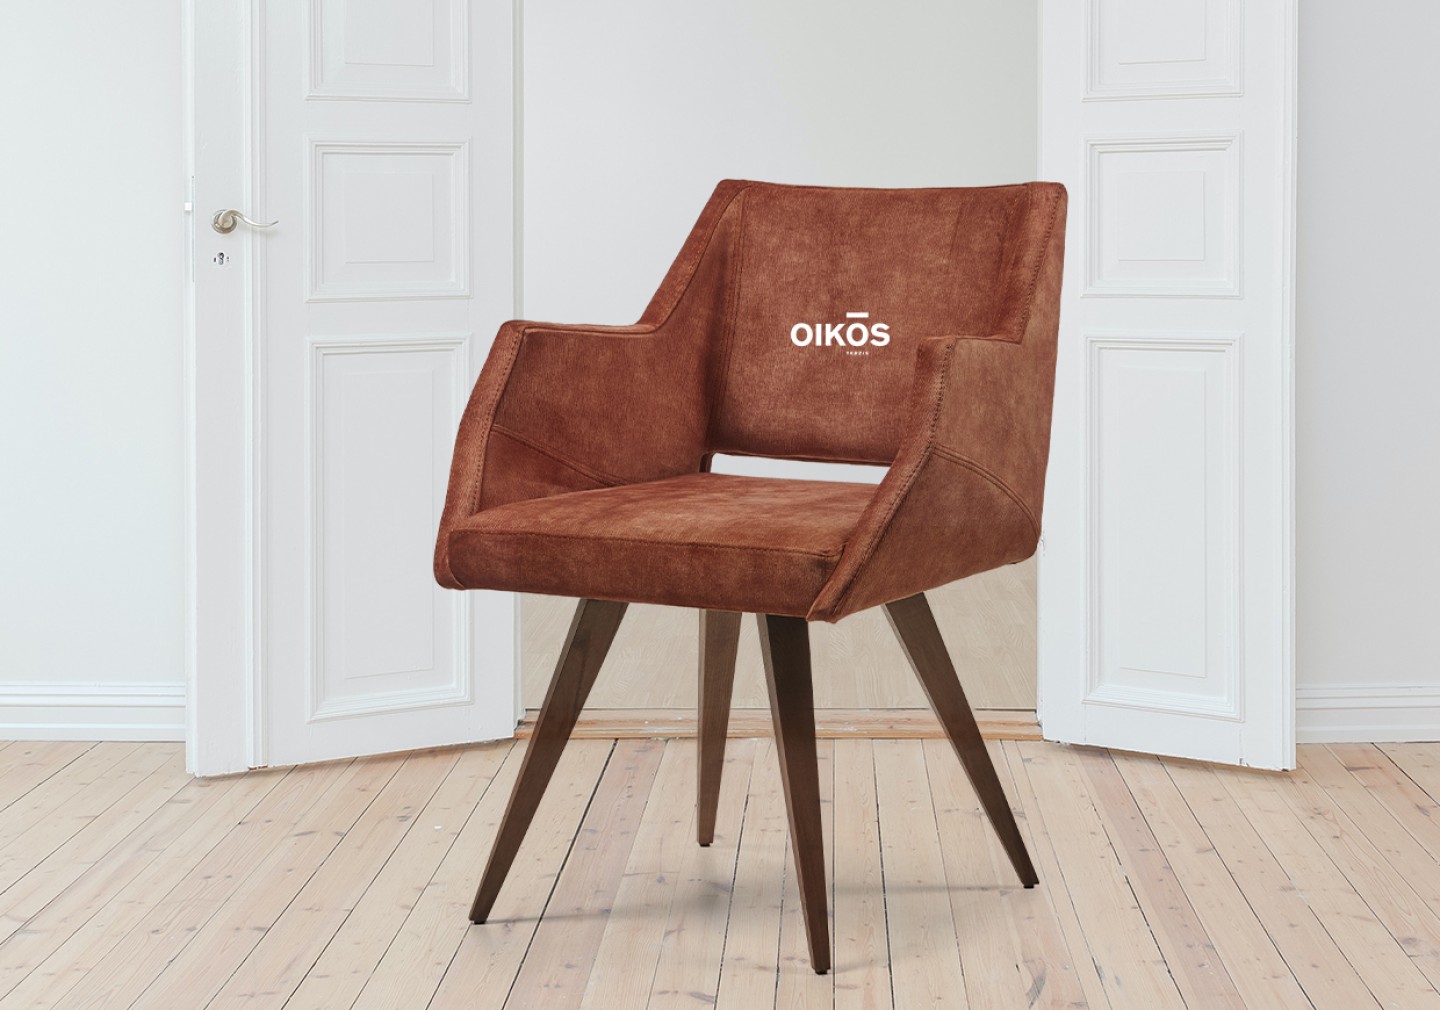 THE PHOENIX DINING CHAIR